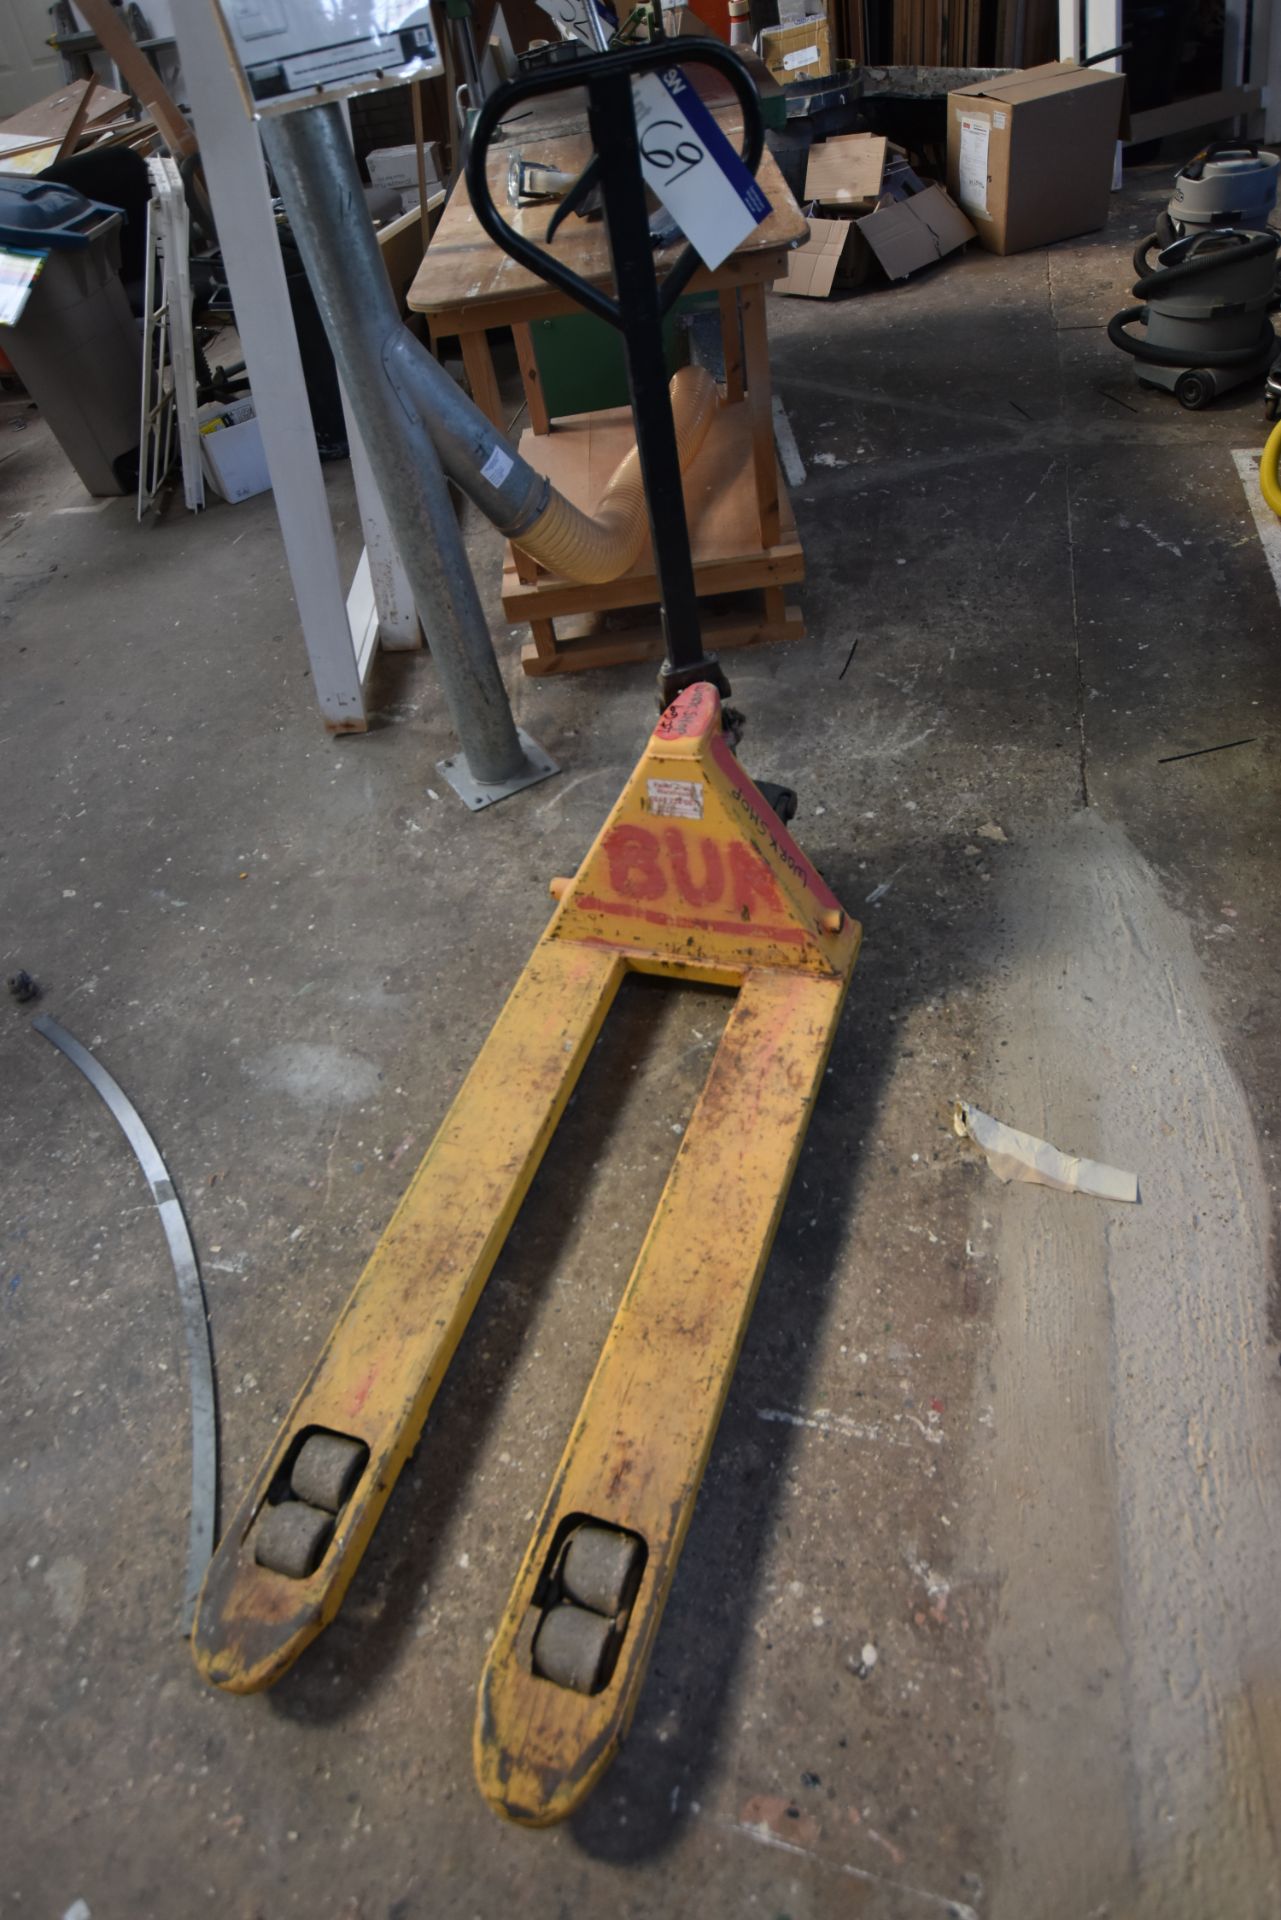 Hand Hydraulic Pallet Truck, approx. 1140 x 530mm on forks